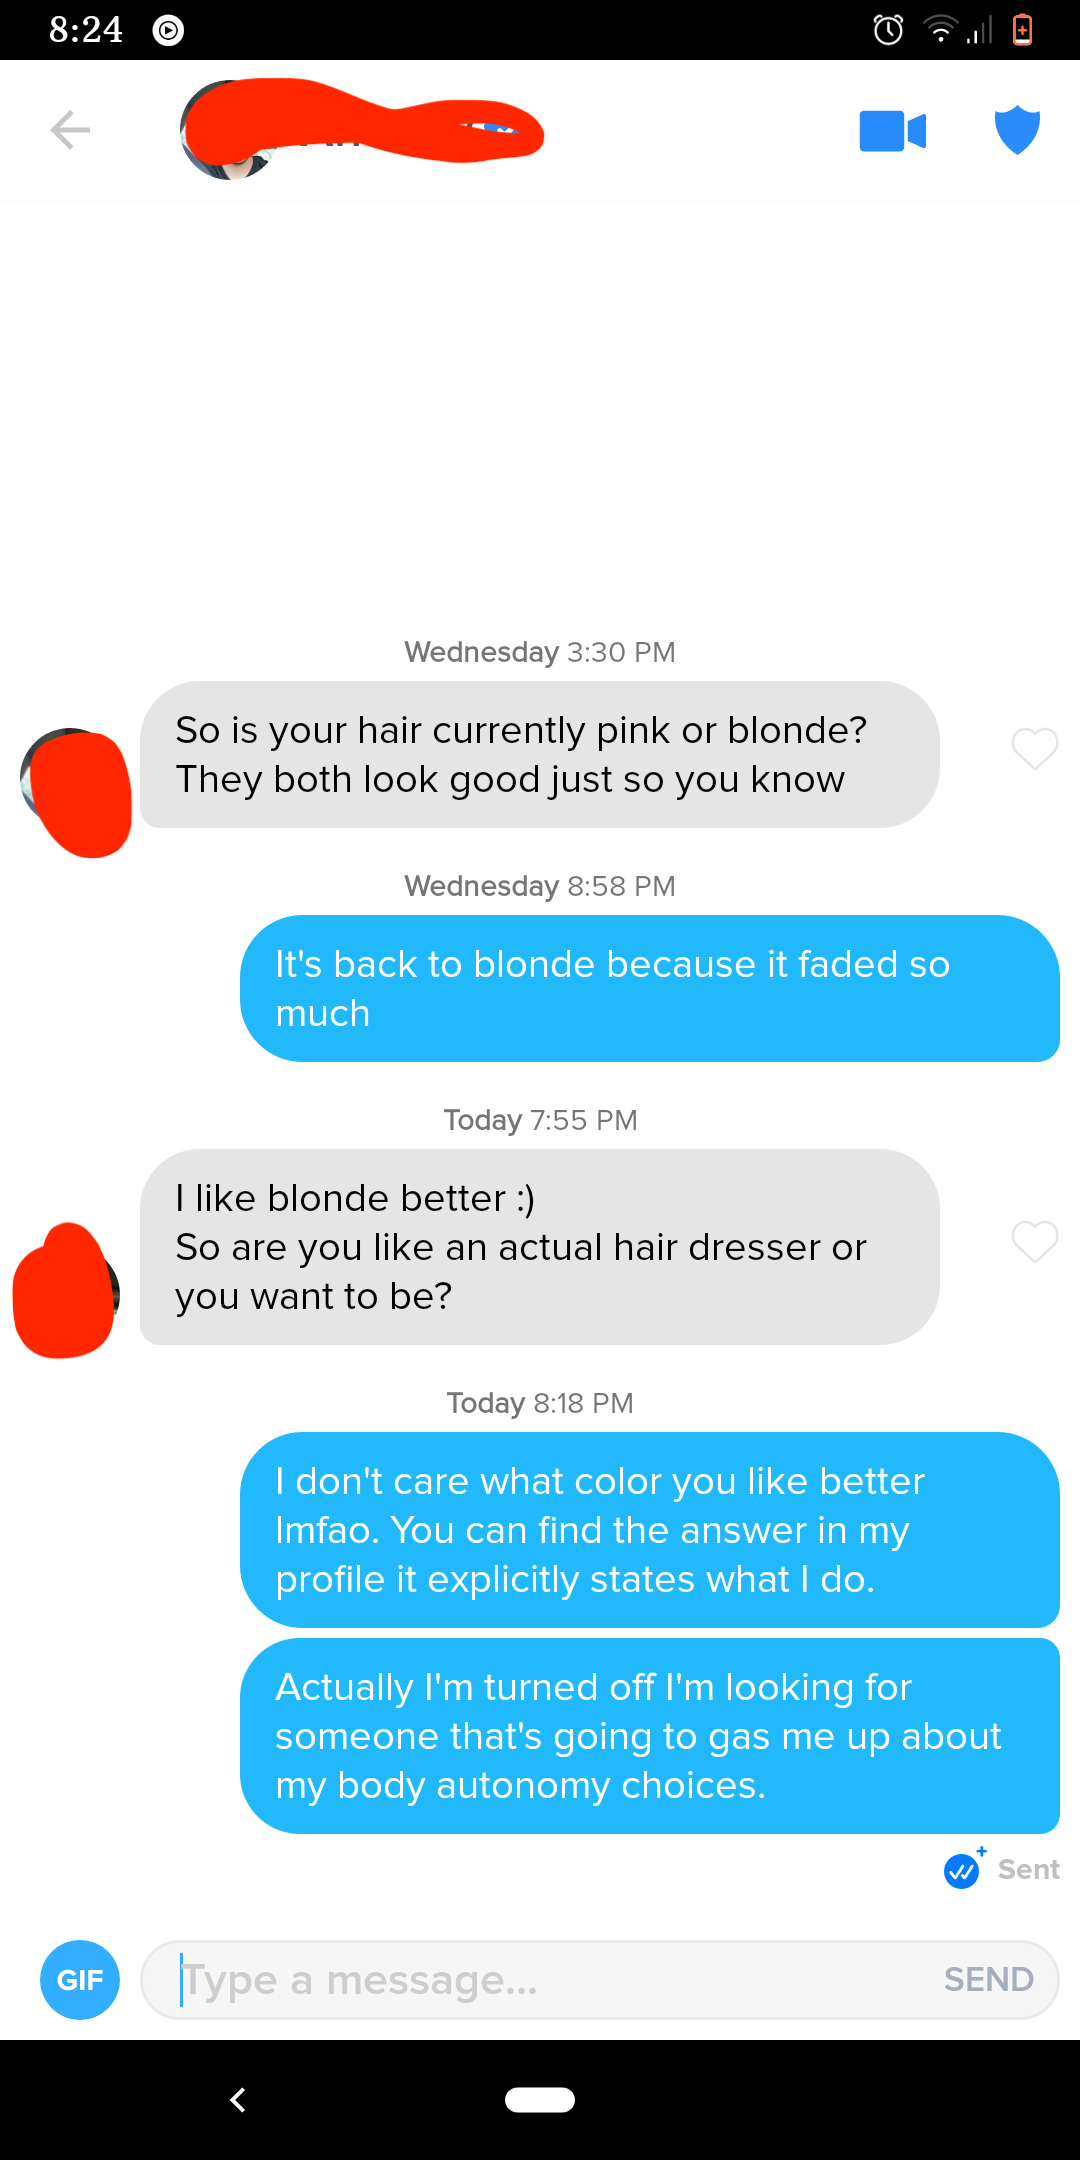 messages from a guy asking if the girl&#x27;s hair is currently pink or blonde and her answering blonde, and him saying he likes blonde better